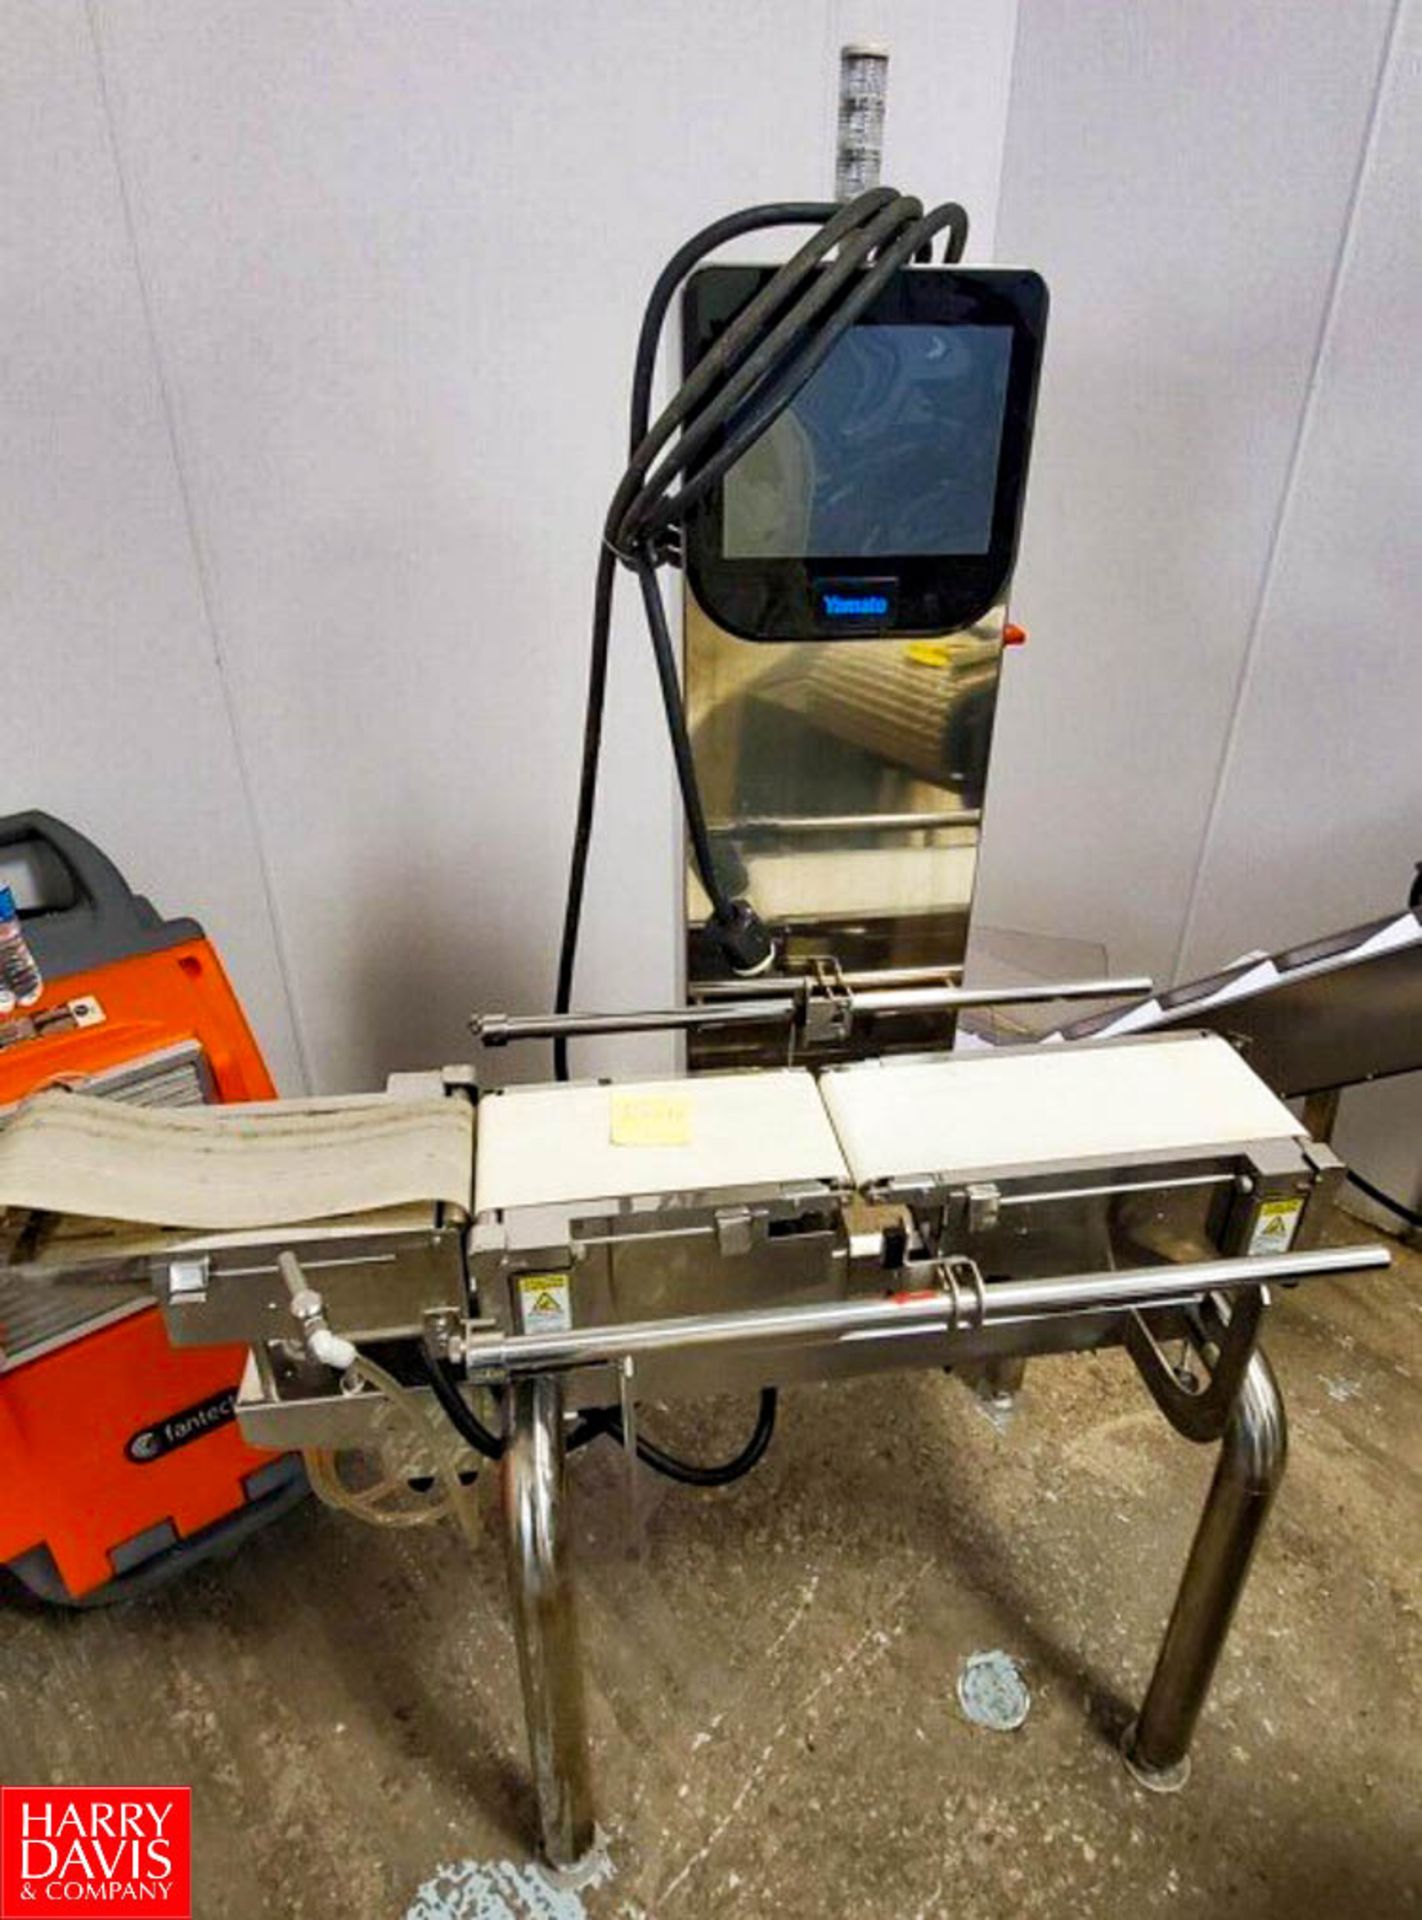 2018 Yamato S/S Checkweighers, Model: CE3000, Weighing Range 6g – 600g, S/N: TA180086 Rigging - Image 2 of 4